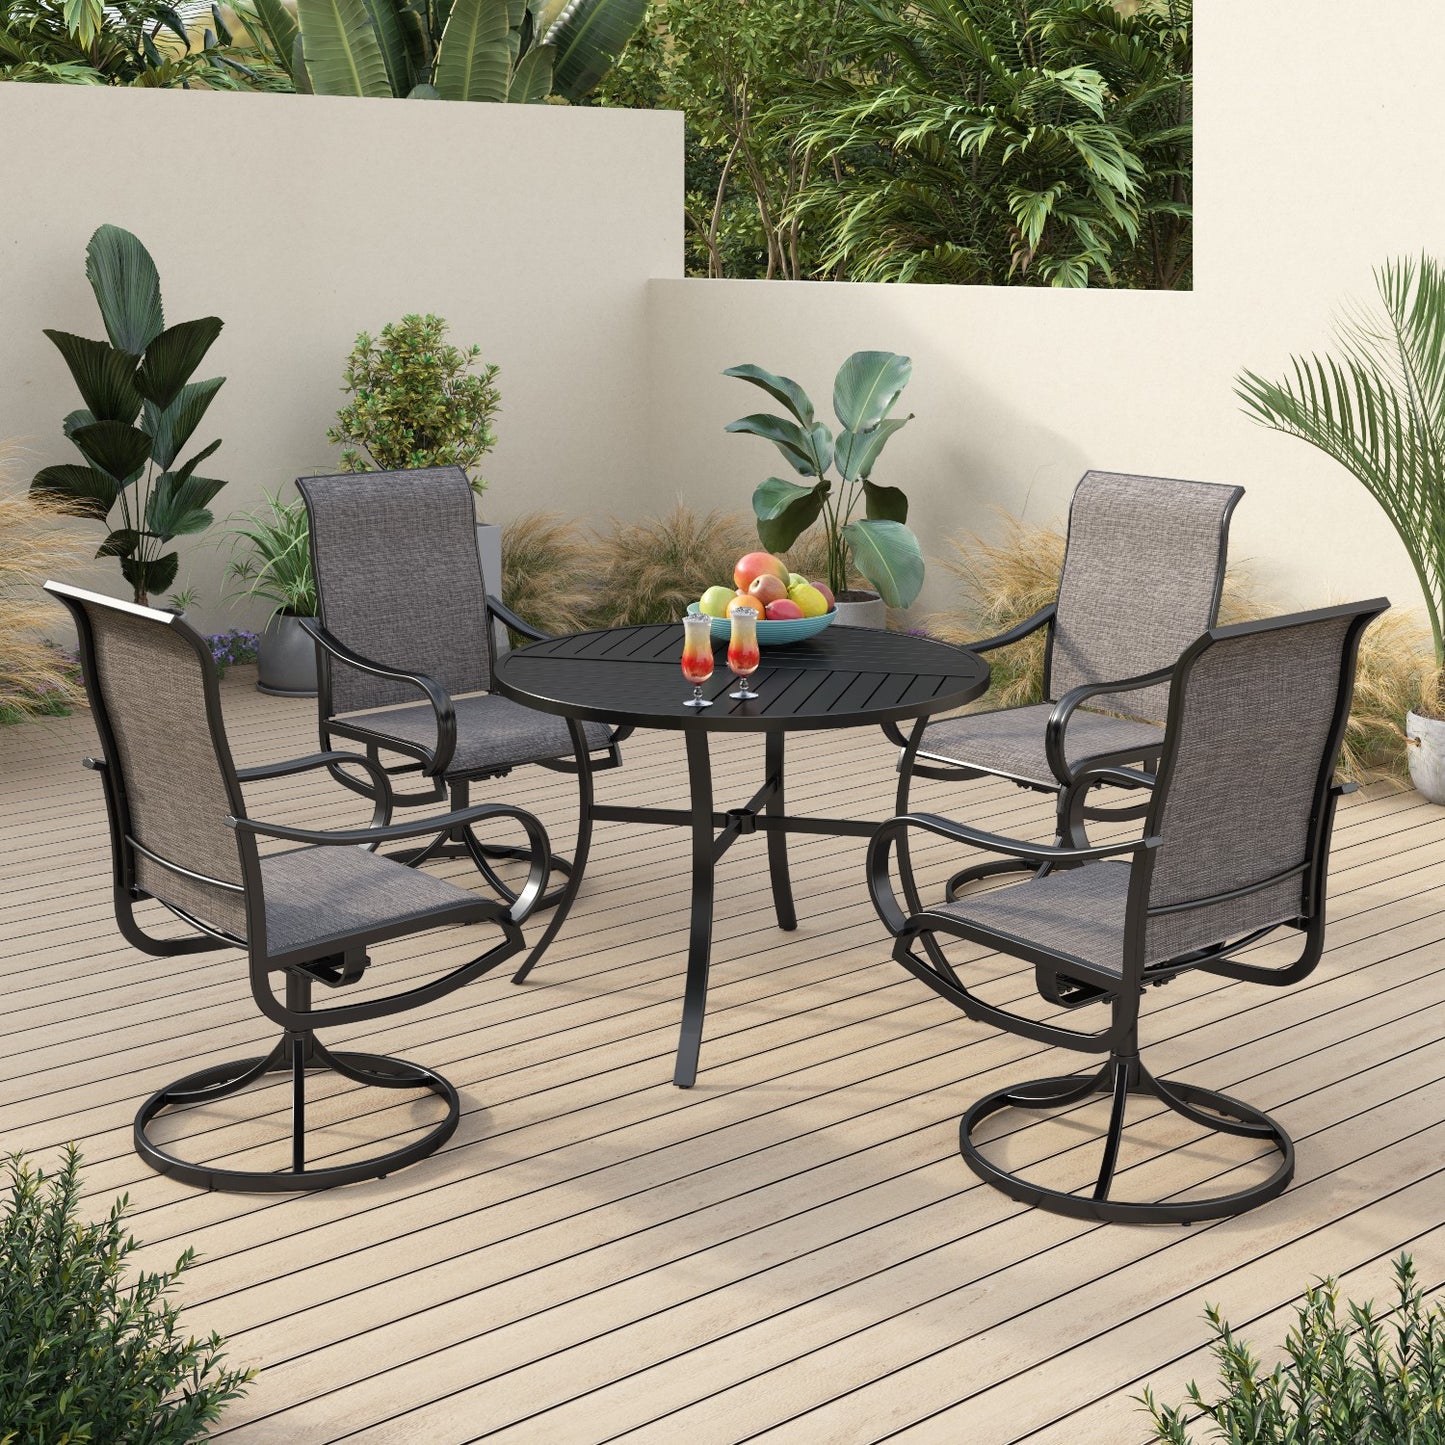 Sophia & William 5 Piece Patio Dining Set Outdoor Furniture Set with 1 Steel Round Table & 4 Textilene Swivel Chairs,Black